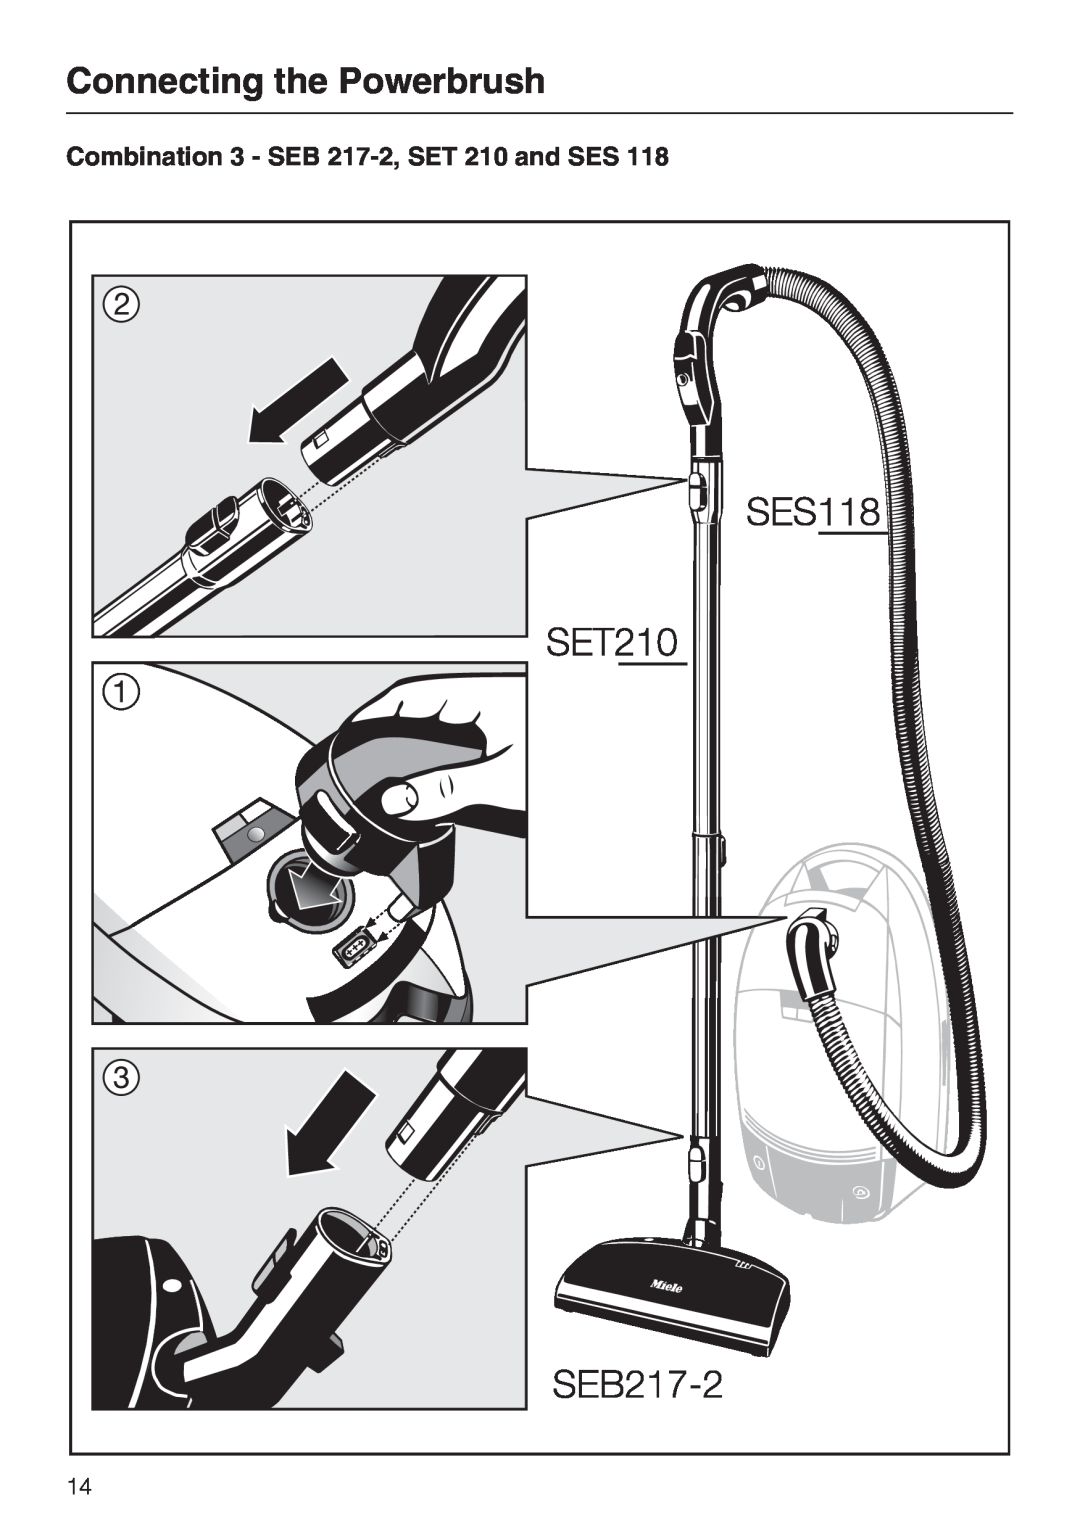 Miele 217-3, 213-2 operating instructions Connecting the Powerbrush, Combination 3 - SEB 217-2,SET 210 and SES 